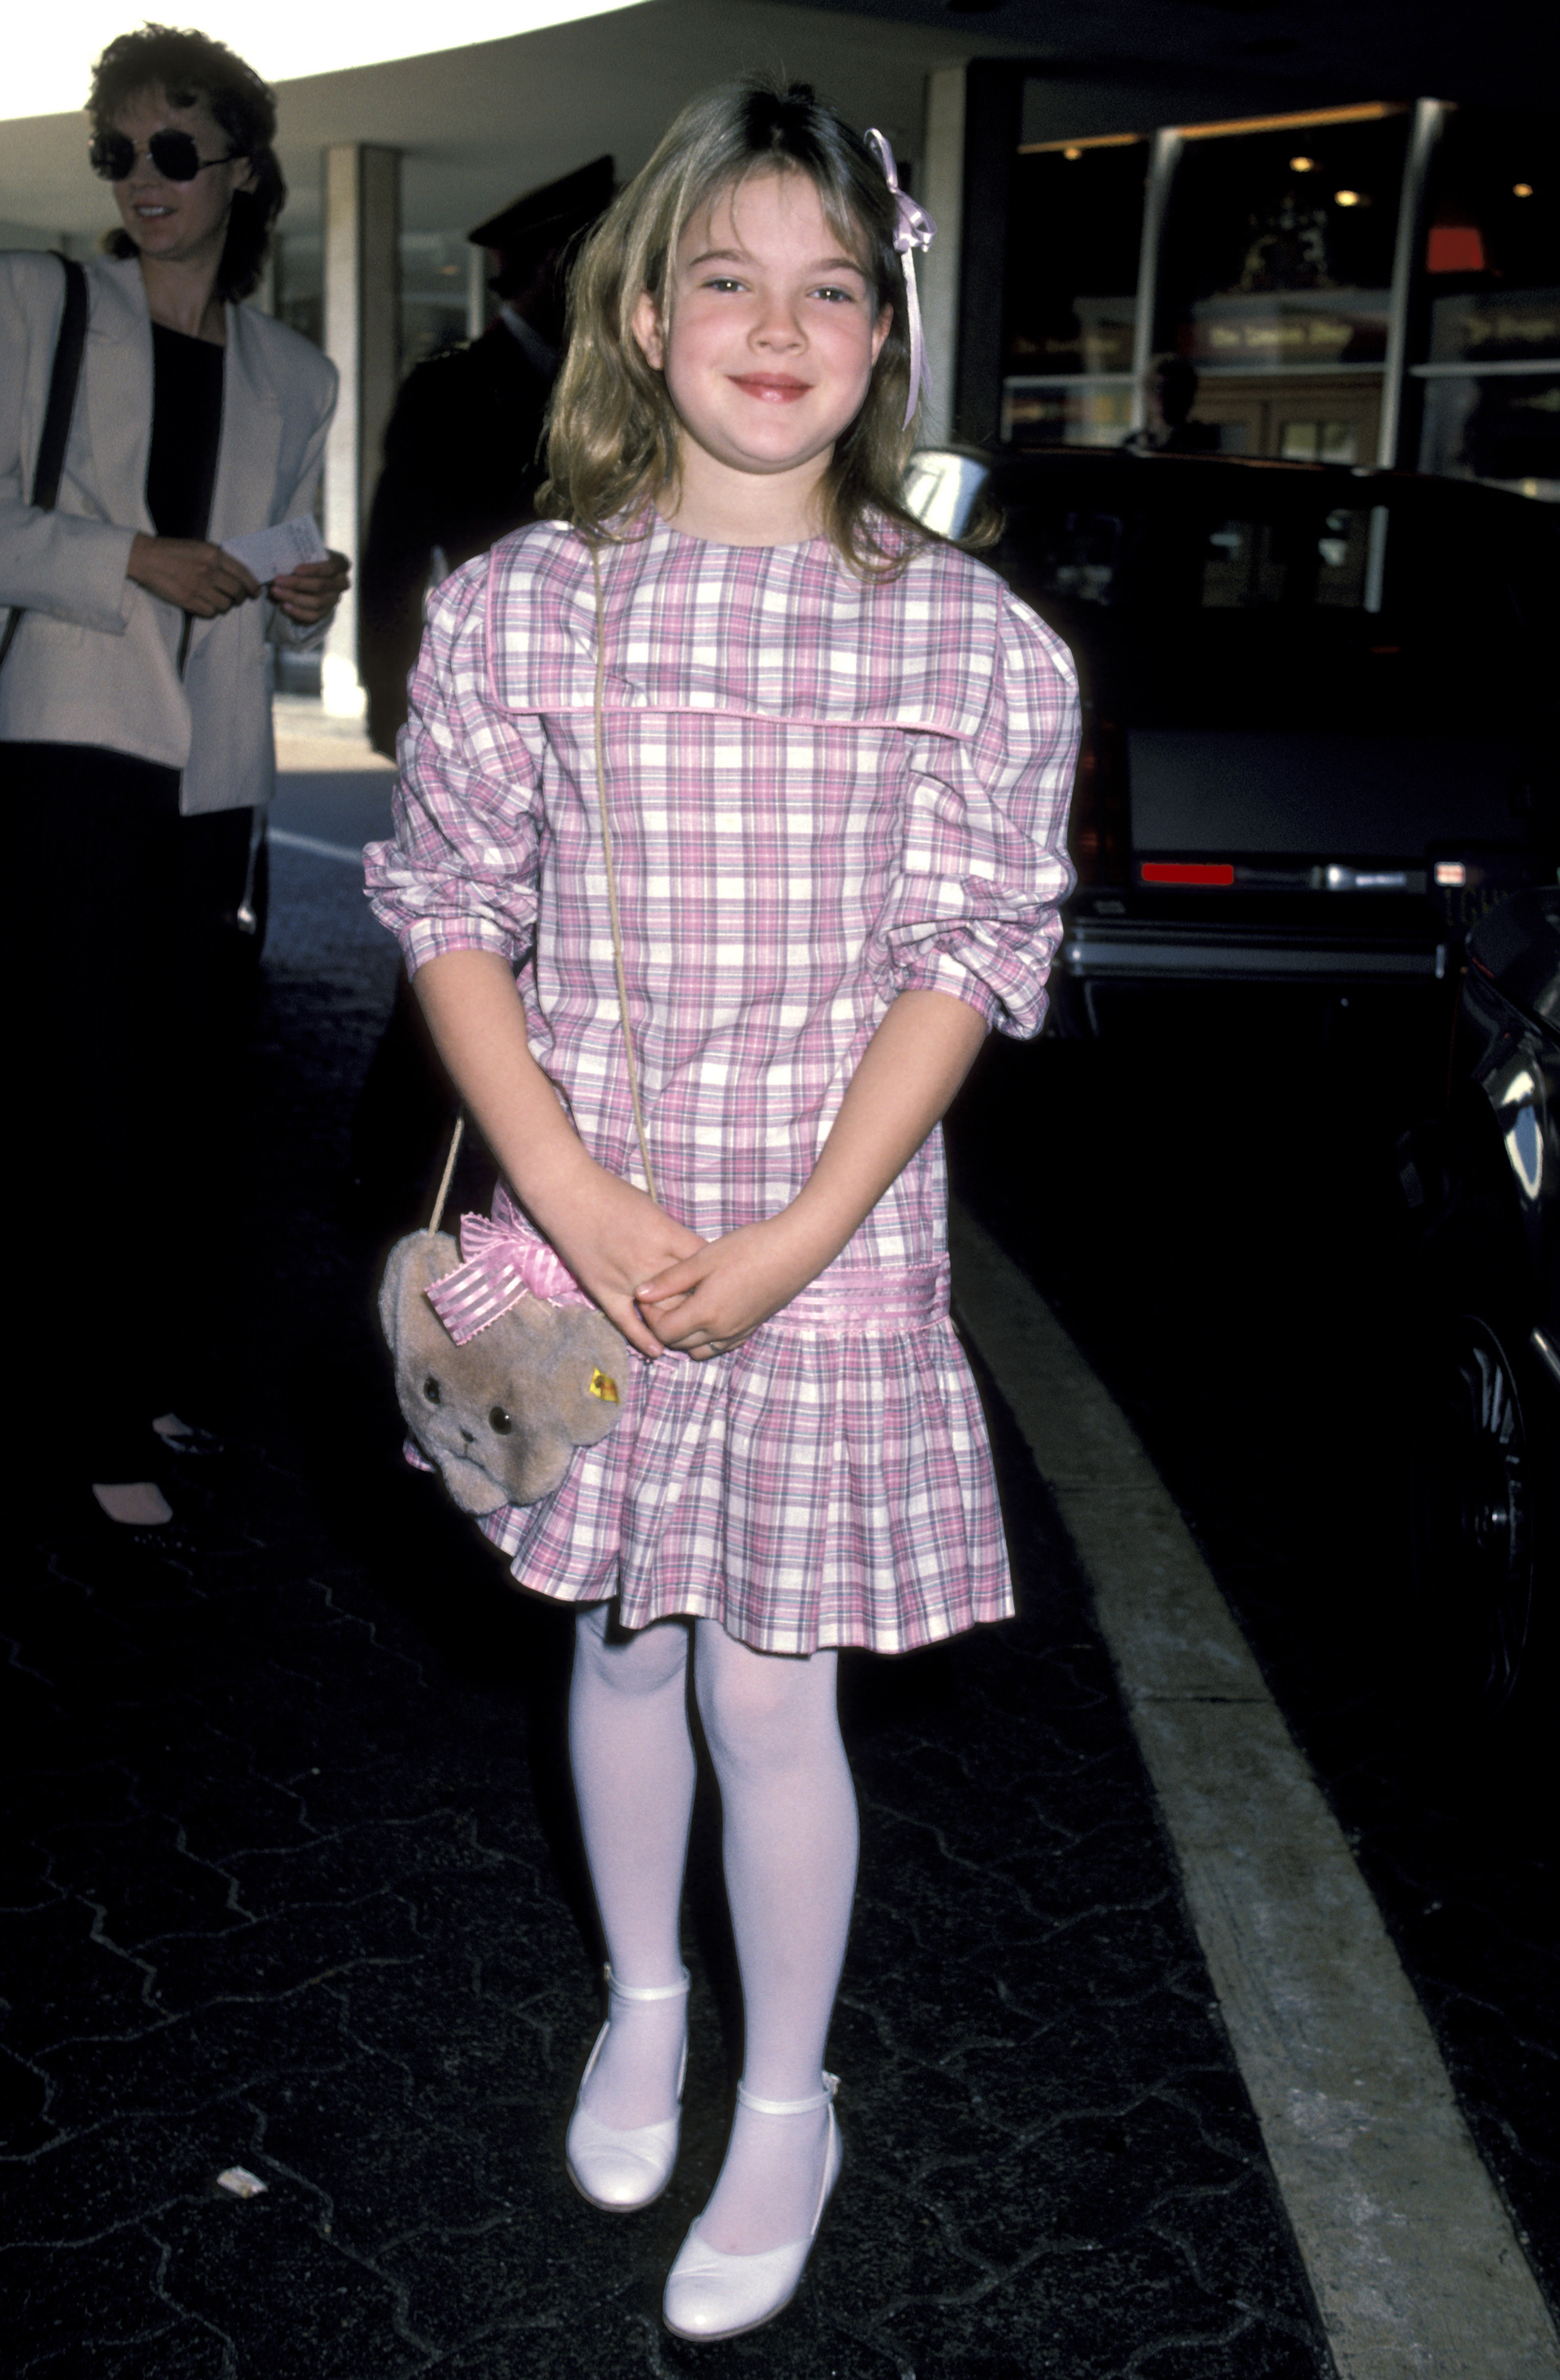 Drew Barrymore on a red carpet as a young girl